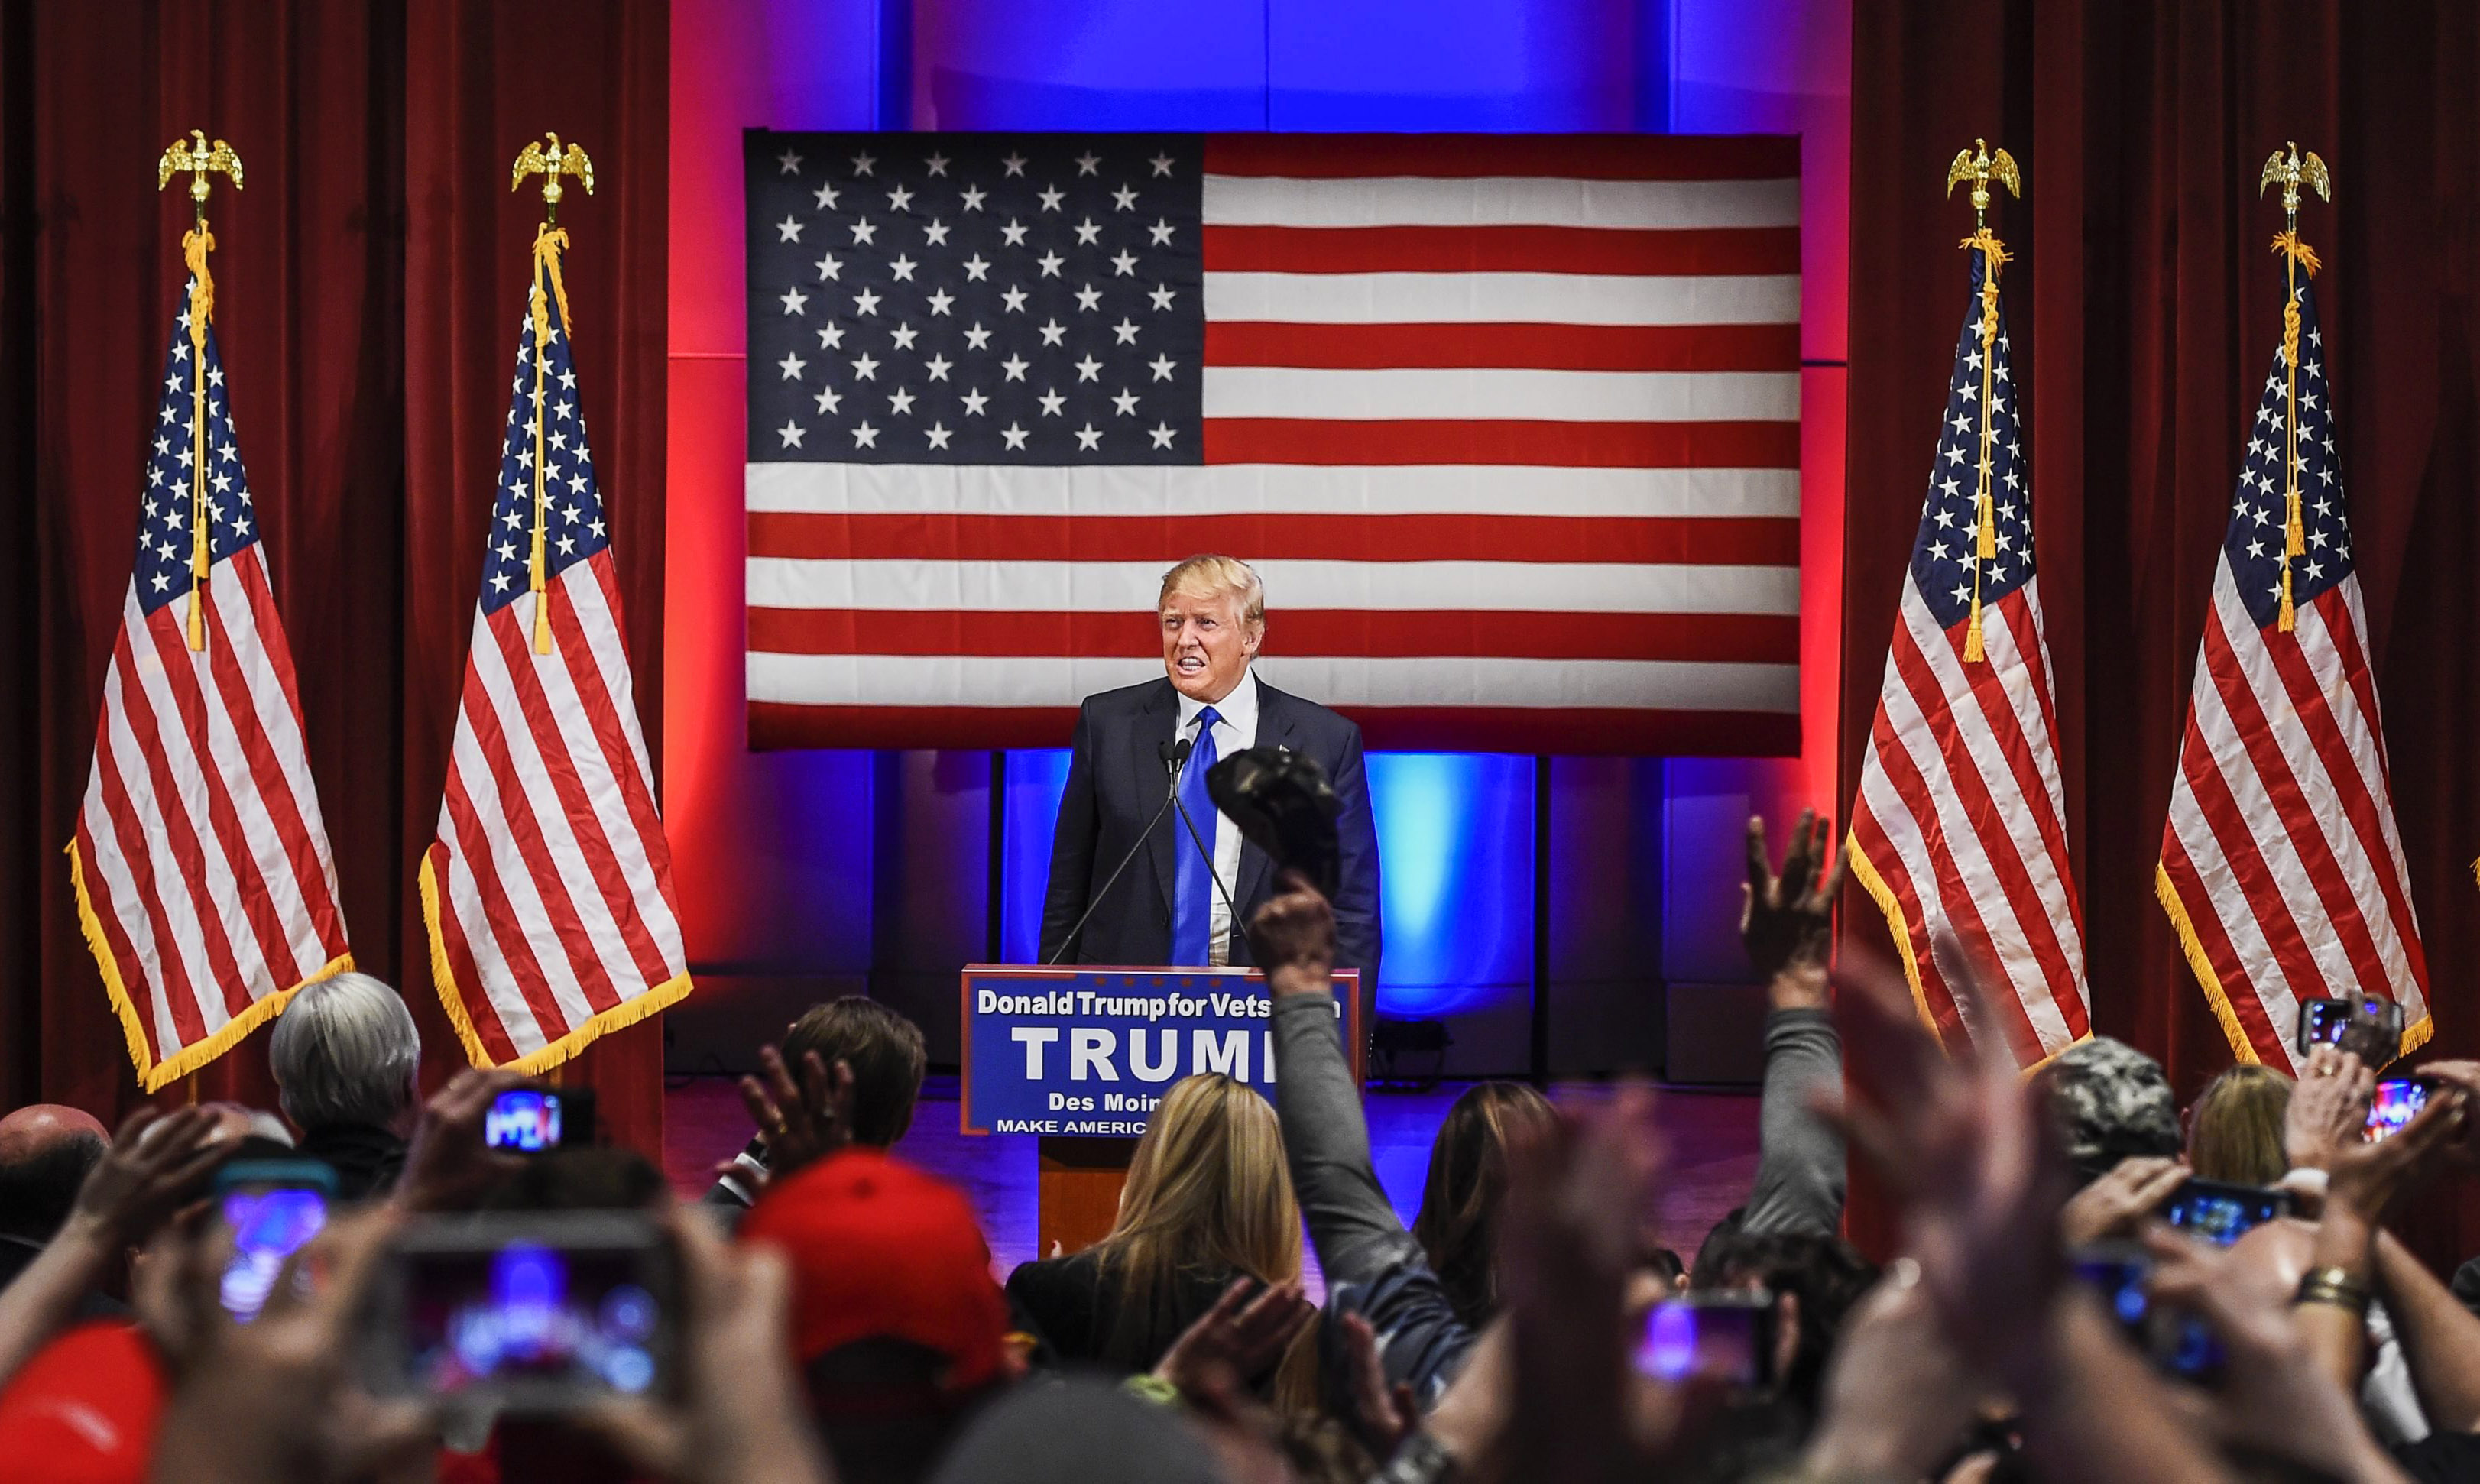 Republican presidential candidate Donald Trump is applauded at a special event to benefit veterans organizations at Drake University in Des Moines, Iowa on Jan 28, 2016. (Larry W. Smith—EPA)